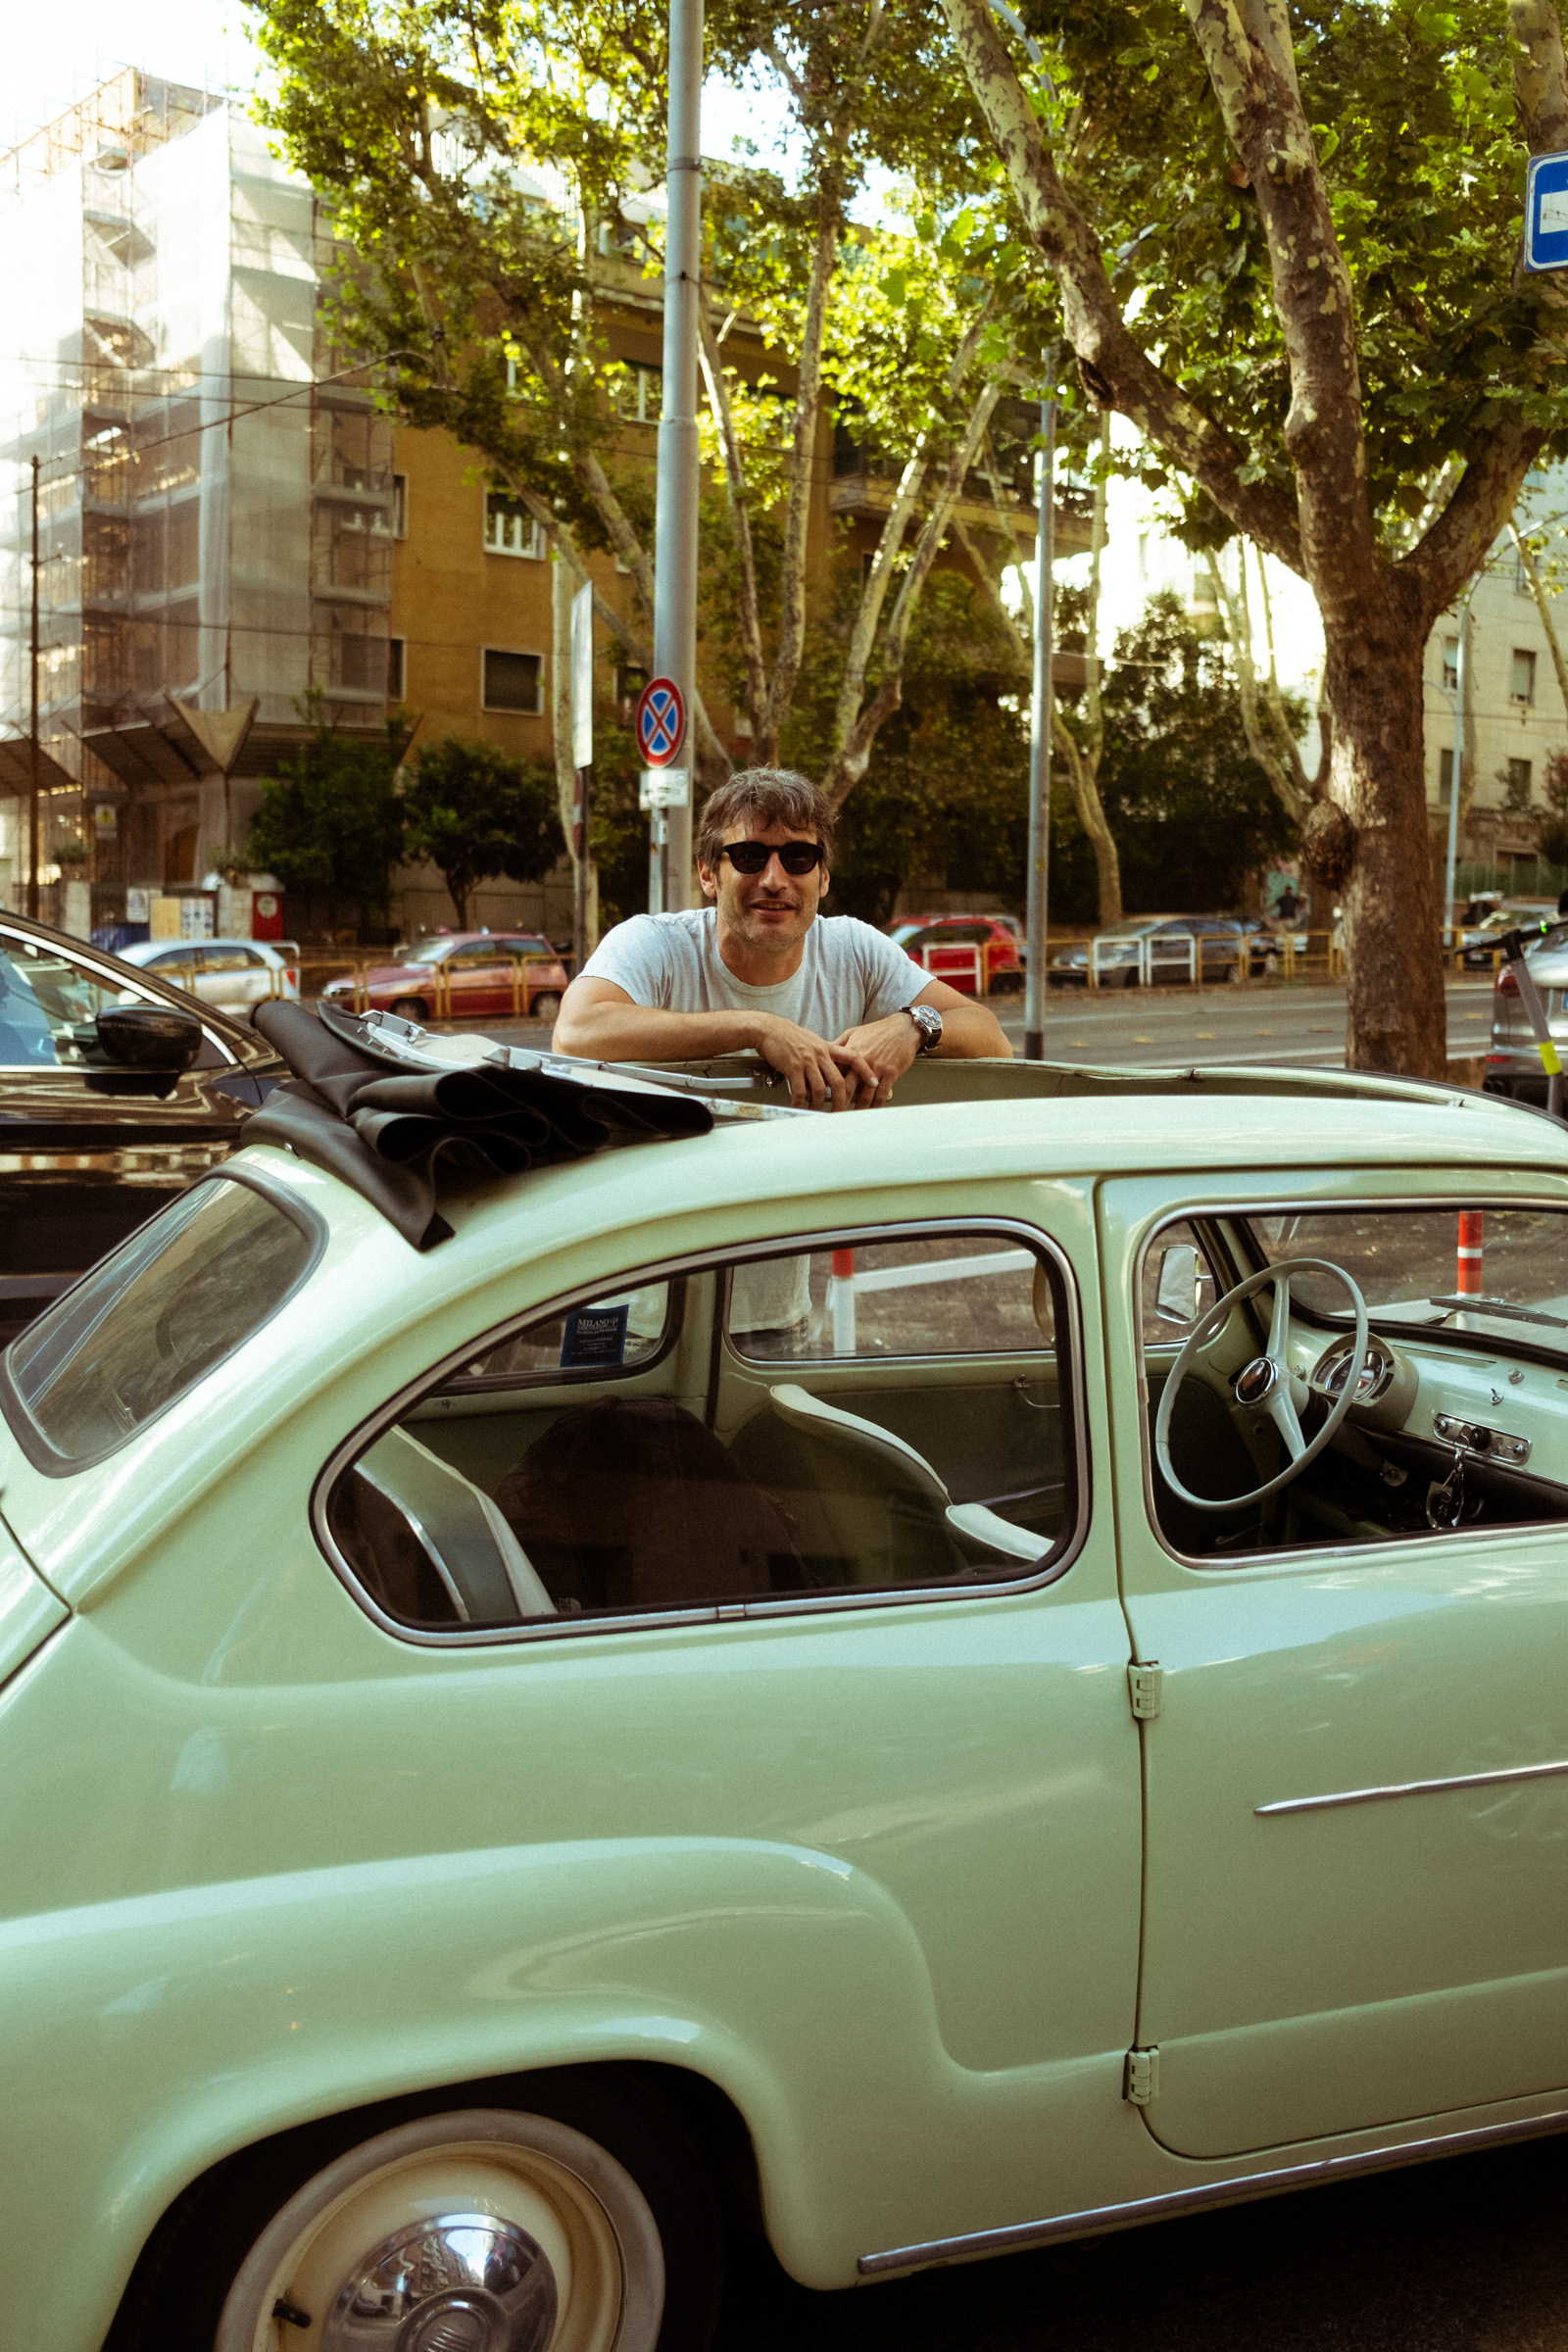 A man and his Fiat Seicento car parked on a Rome street